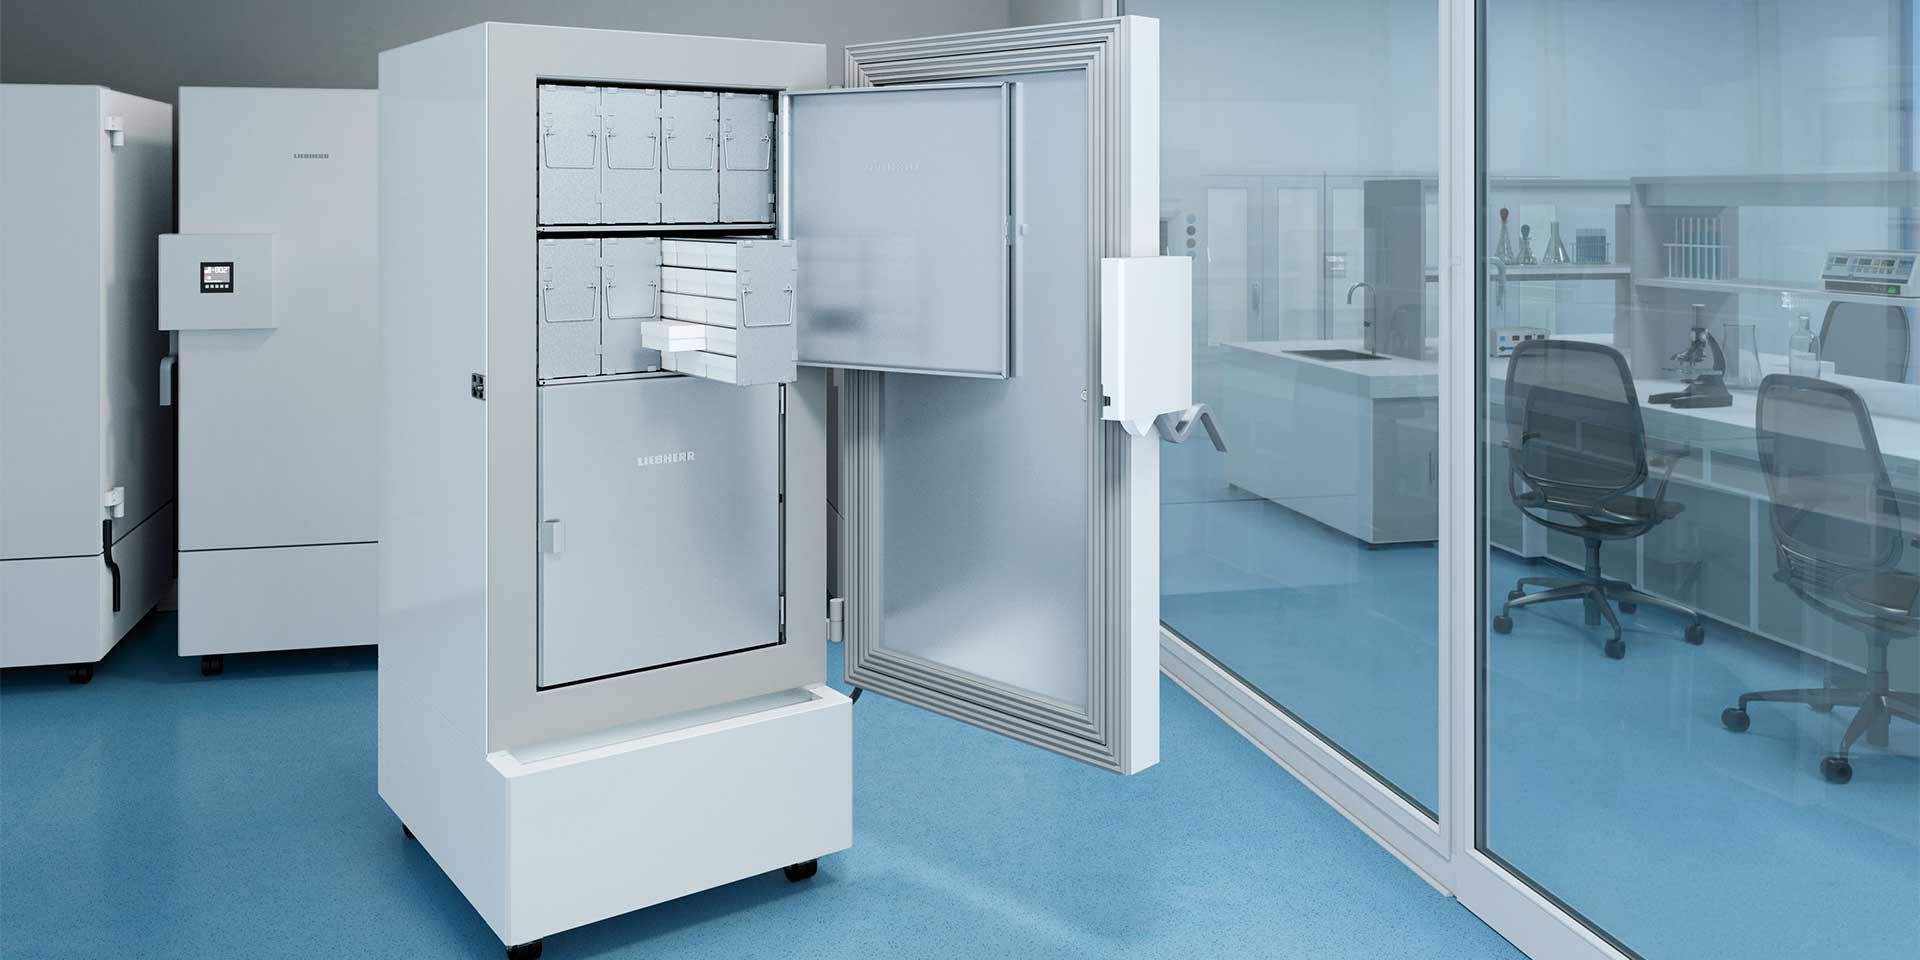 https://home.liebherr.com/media/hau/images/commercial-and-trade/laboratory-and-medical-technology/storing-vaccines/liebherr-cooling-for-vaccines-stage-v3.jpg